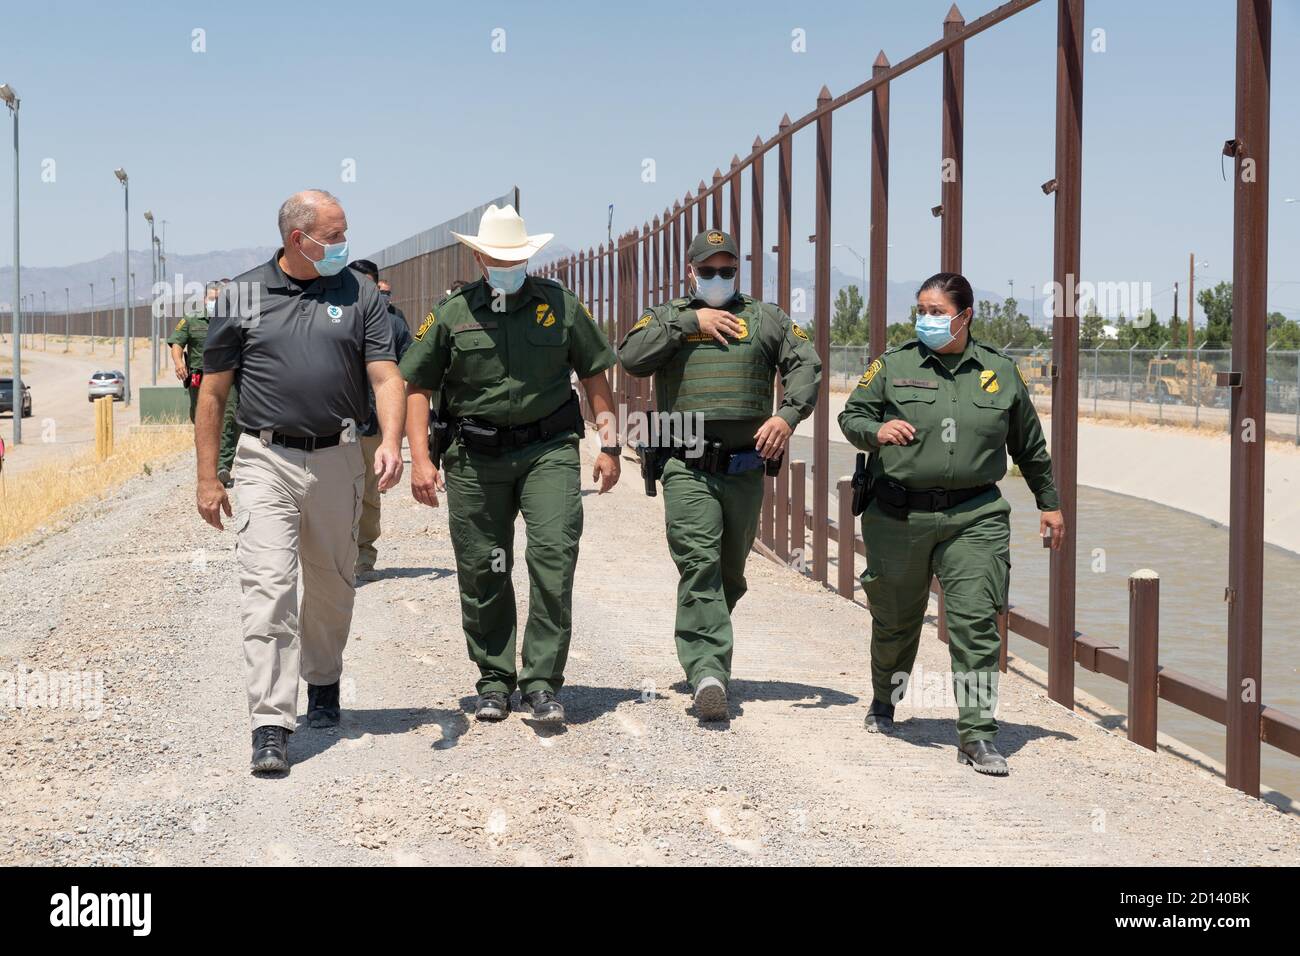 U.S. Customs and Border Protection Acting Commissioner Mark Morgan, left, tours a section of the U.S. - Mexico border wall along with U.S. Border Patrol Sector Chief Gloria I. Chavez, far right, and other senior Border Patrol officials during a visit to El Paso, Texas, August 26, 2020. CBP Stock Photo